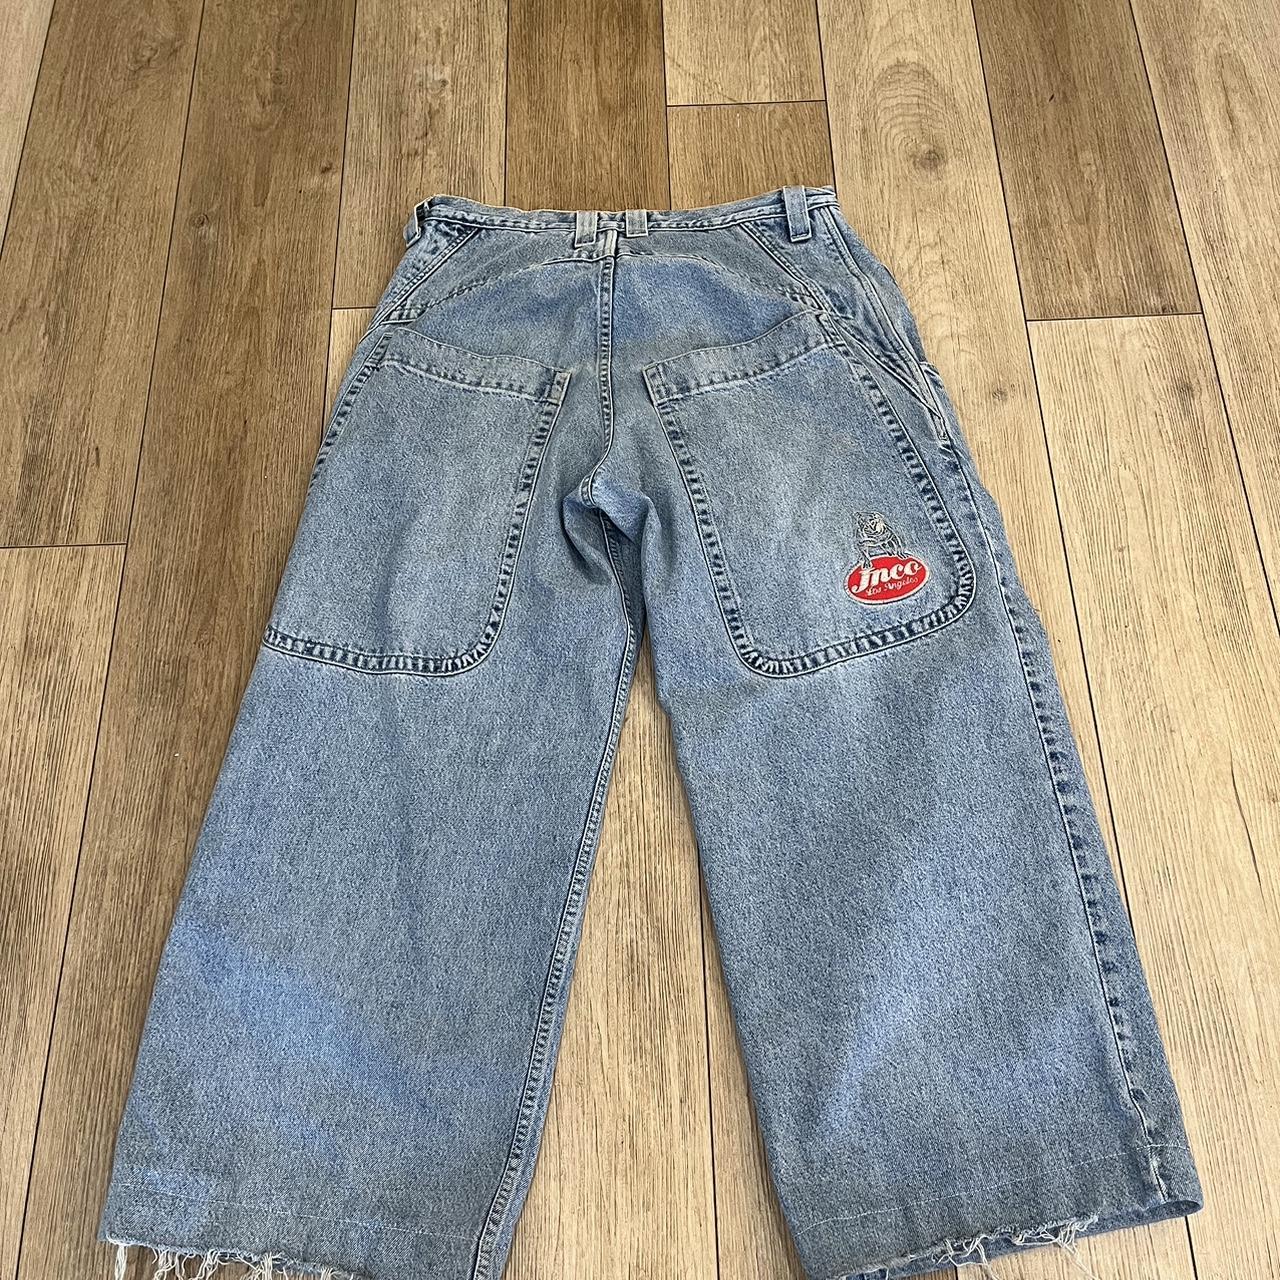 MESSAGE BEFORE BUYING jnco big rig fit absolutely... - Depop